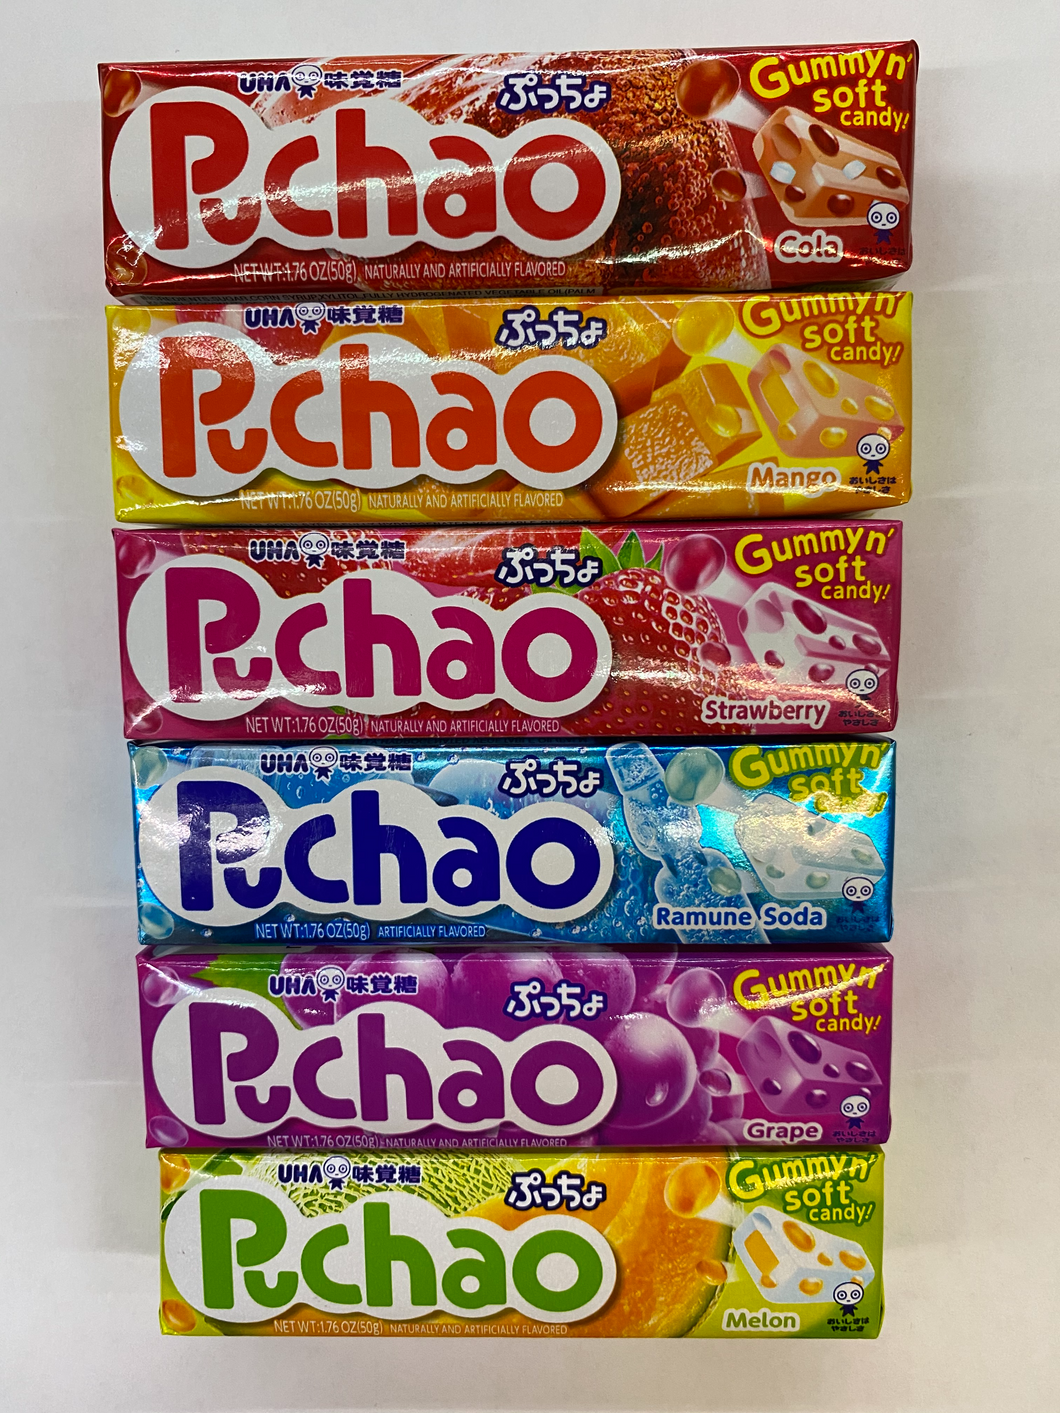 Puchao Candies (six flavors)